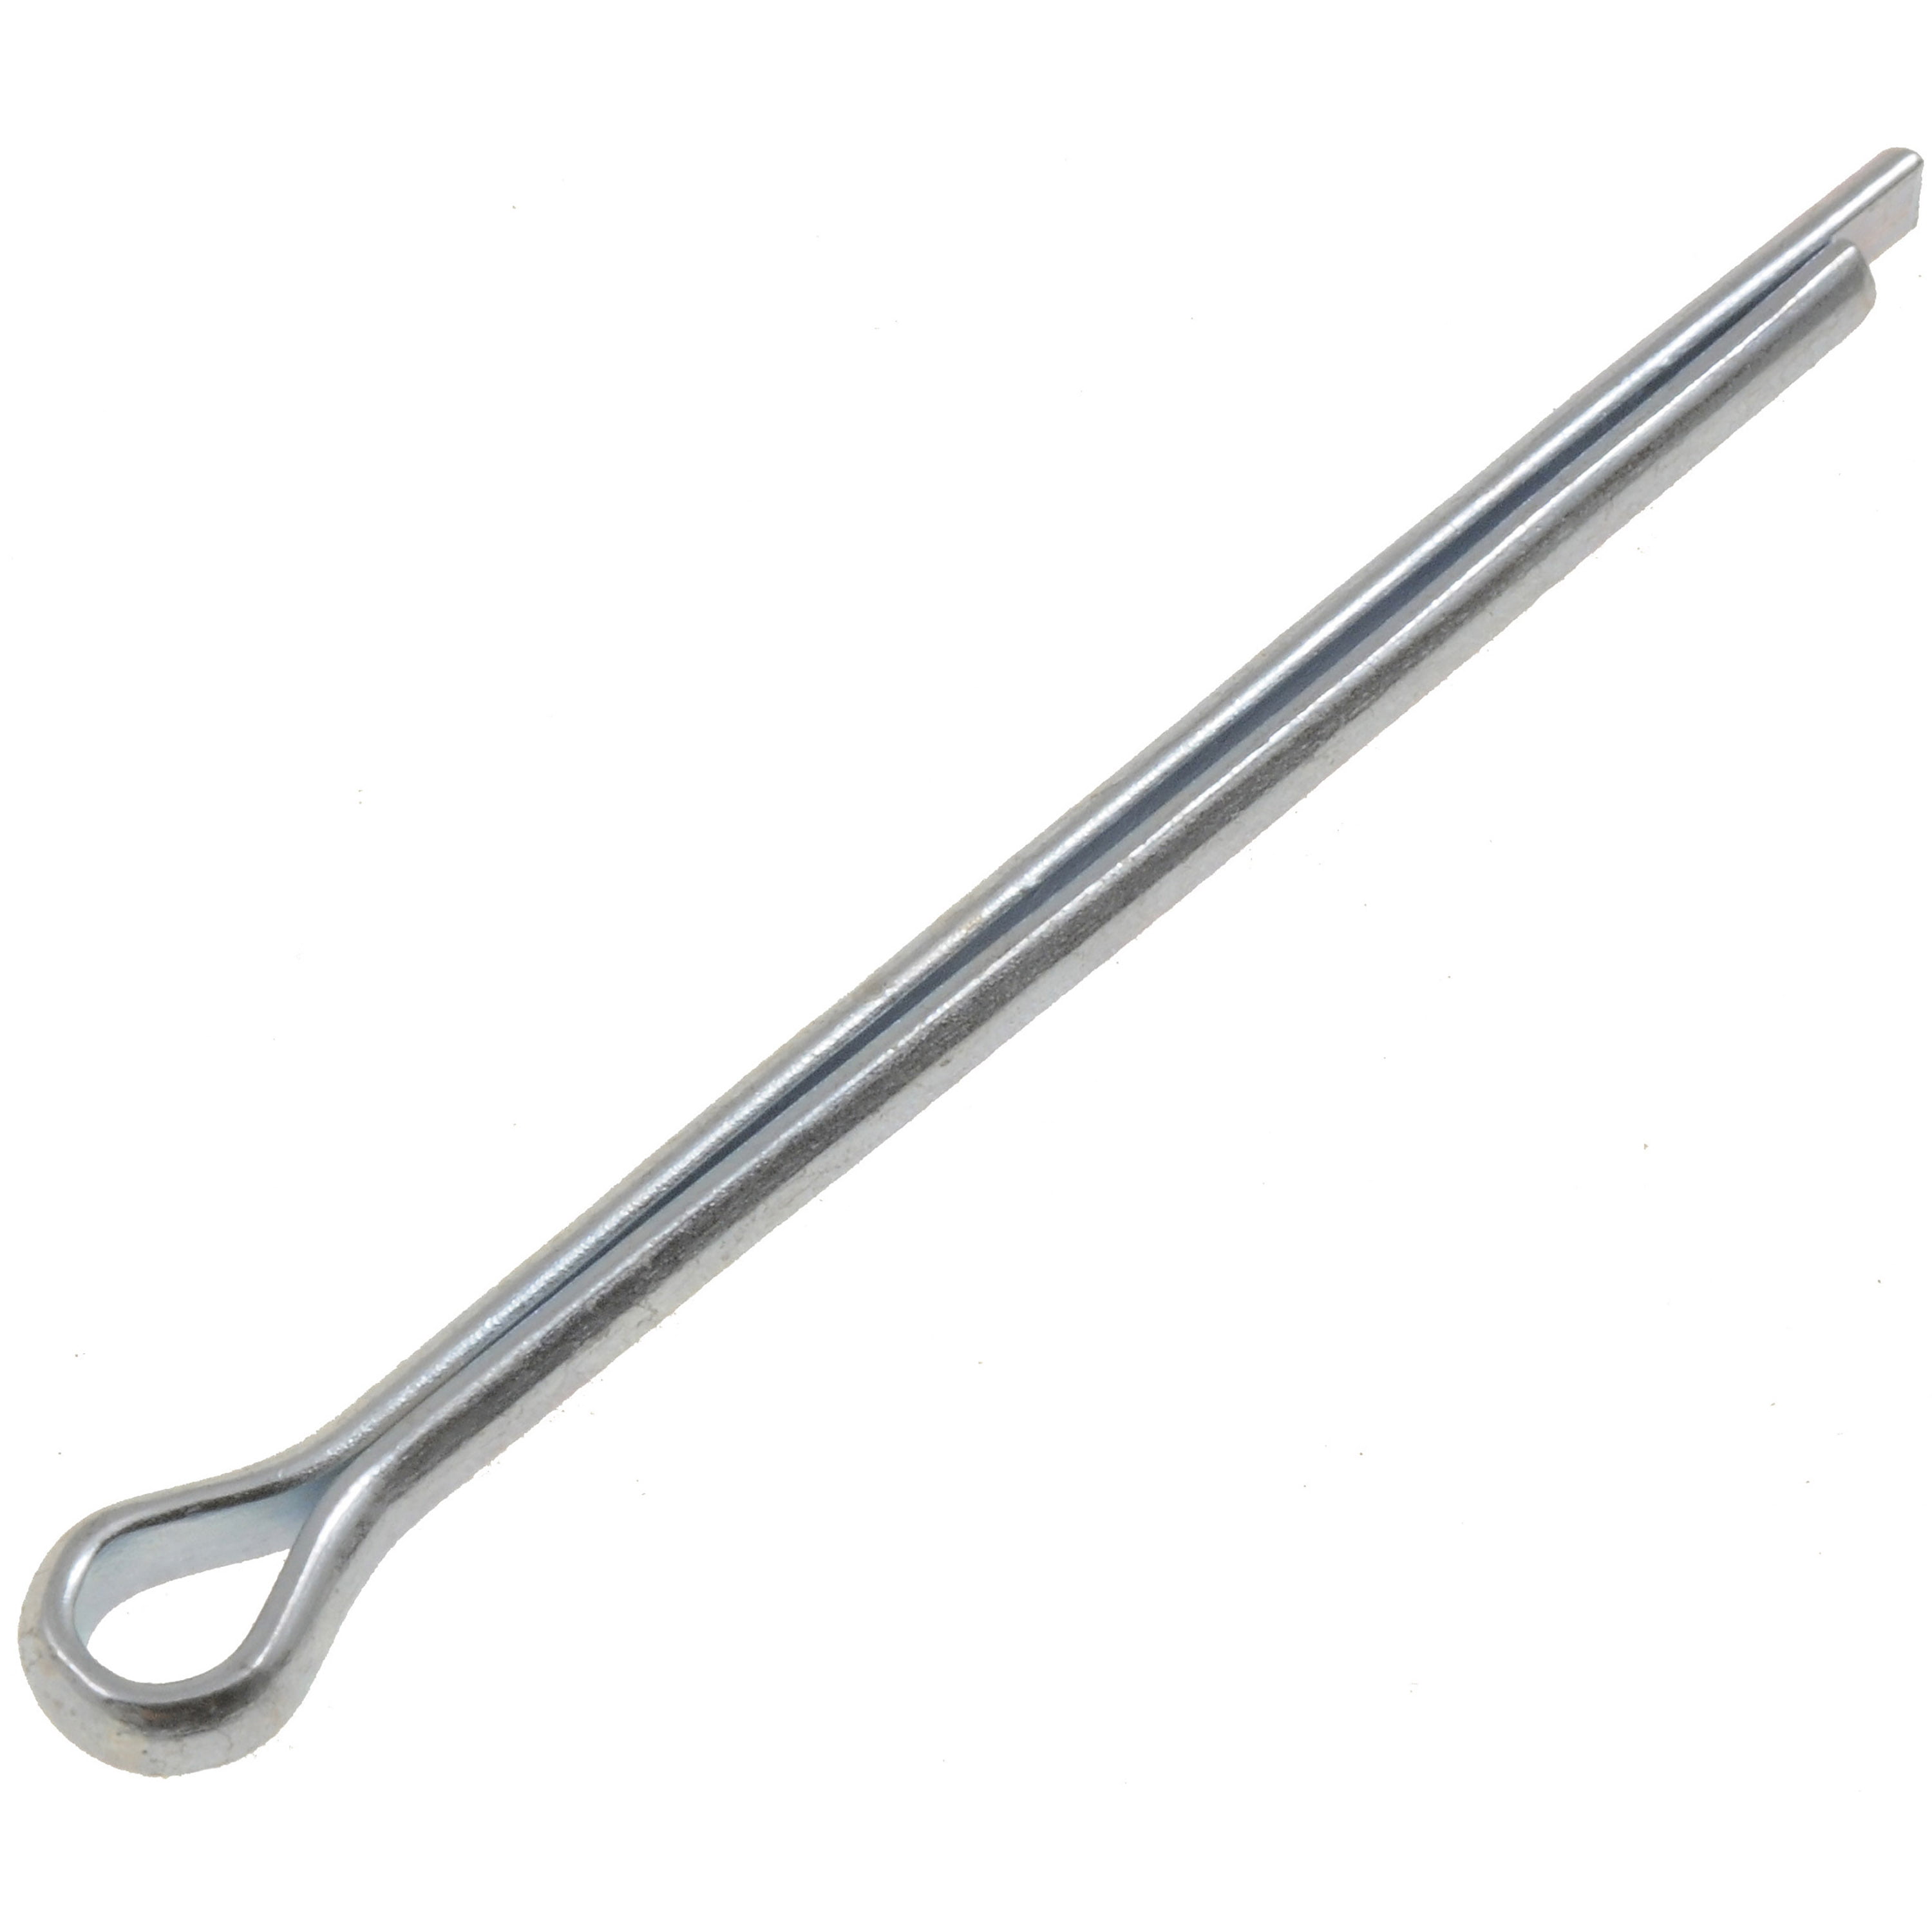 Zinc Plated Wholesale Available Select Your Quantity 1/8" x 2" Cotter Pin 